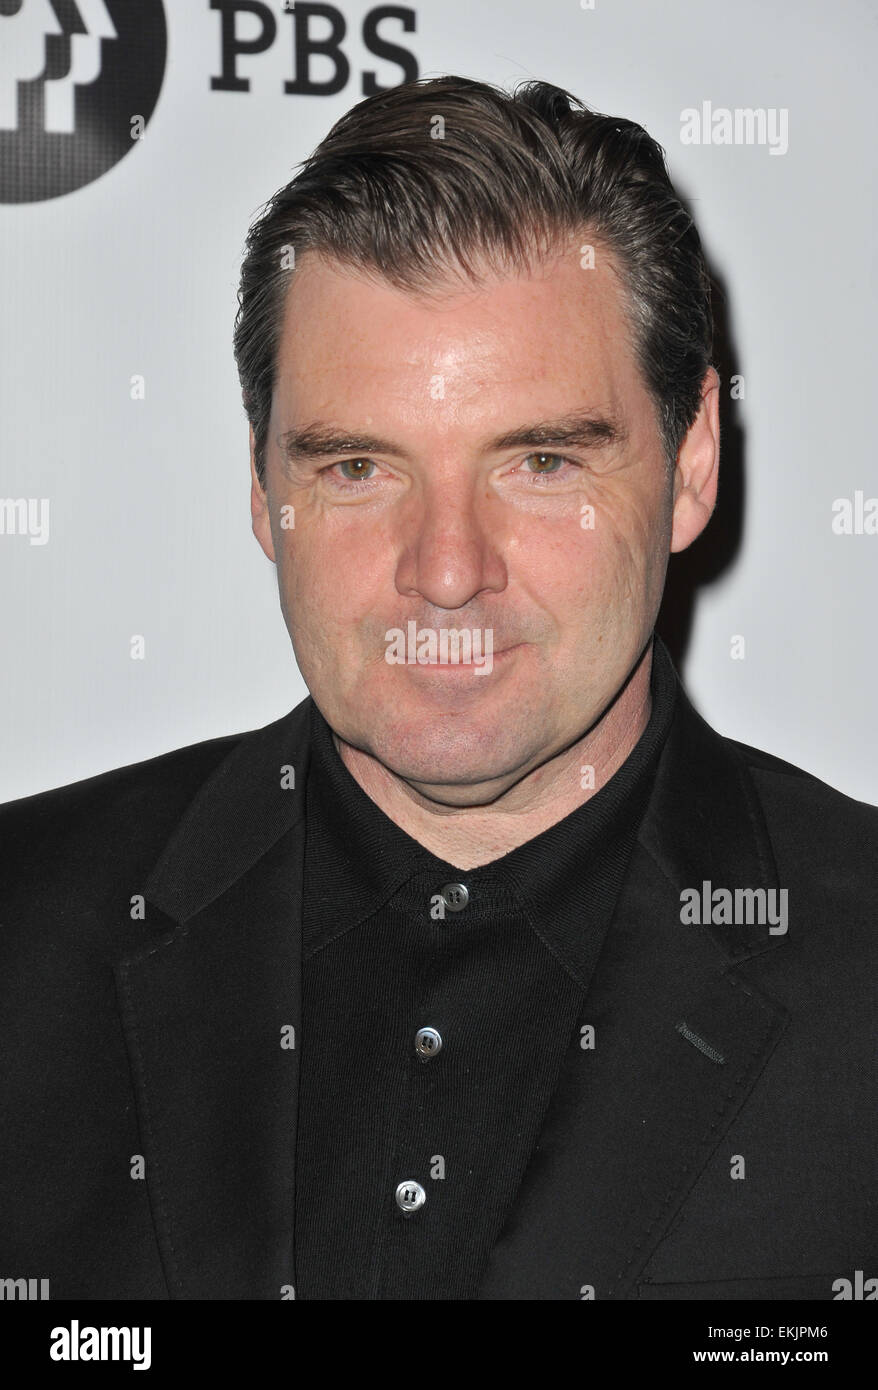 LOS ANGELES, CA - JULY 22, 2012: Brendan Coyle at photocall for the third series of Downton Abbey at the Beverly Hilton Hotel. Stock Photo